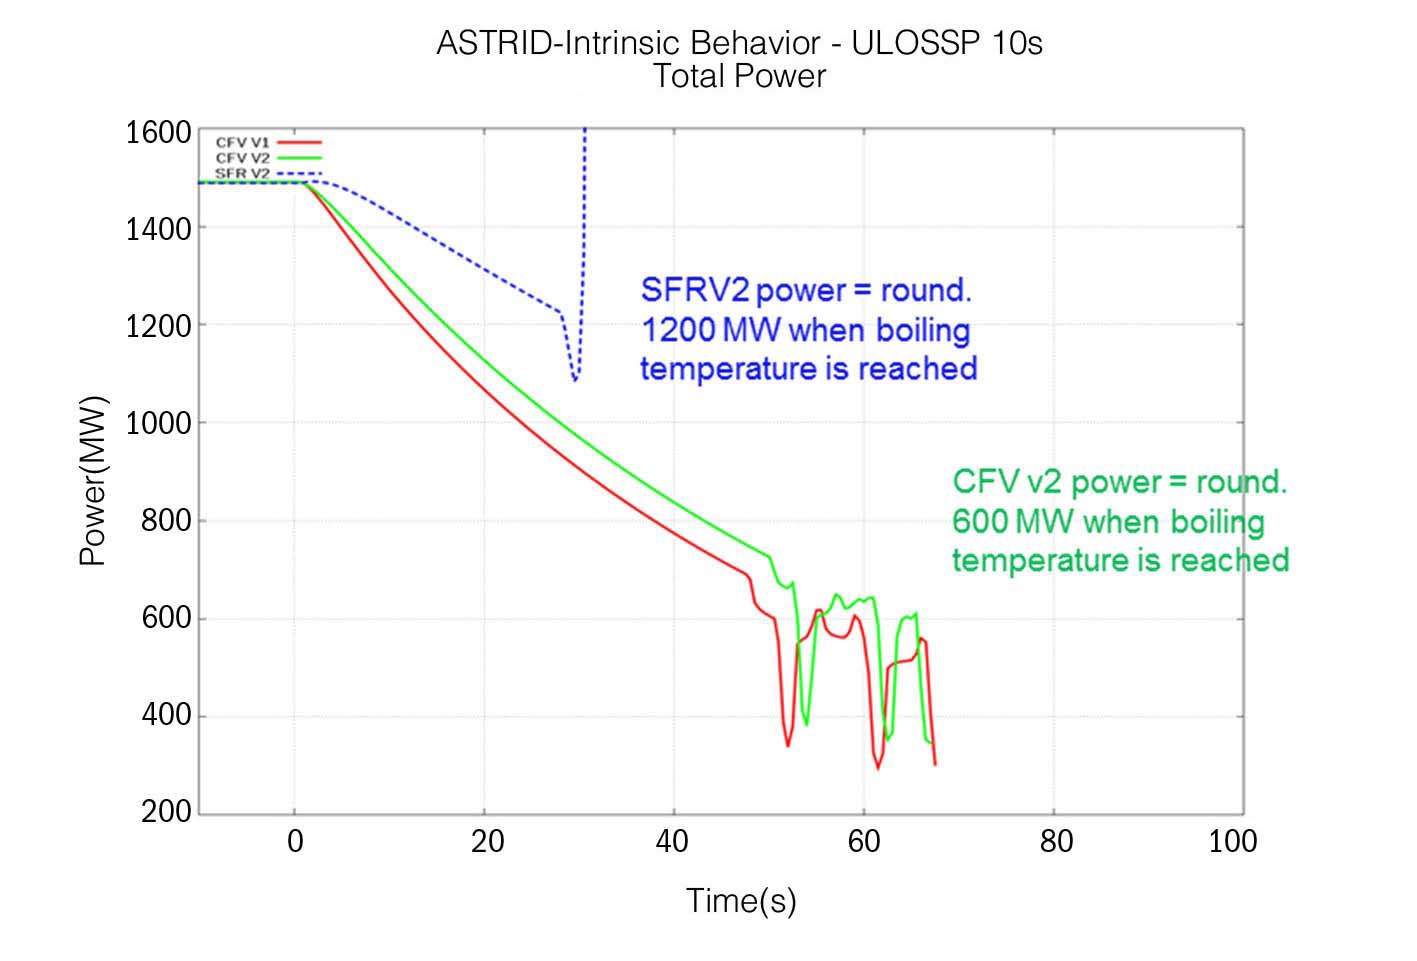 Total Loss of Power Transient for CFV v1, CFV v2 and SFR V2 Cores - Core Semi-flow Rate within 10s - Core Power